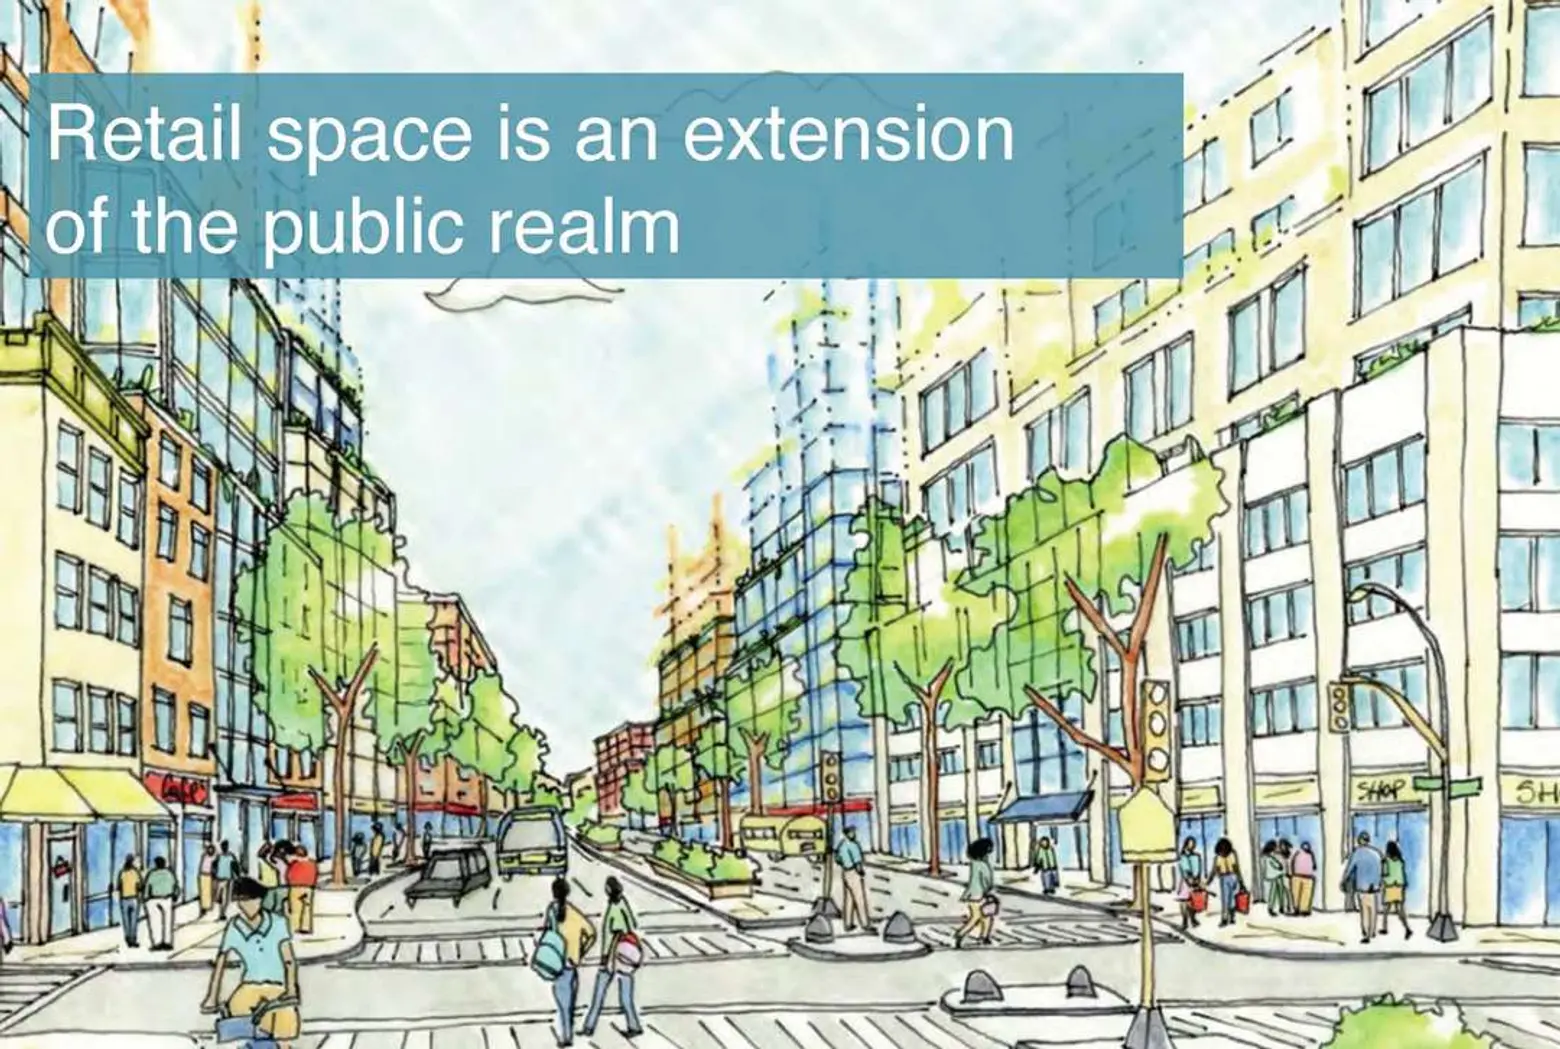 New York City Department of Housing, Preservation & Development, Design Guidelines for Neighborhood Retail, Design Trust for Public Space, The Energetic City